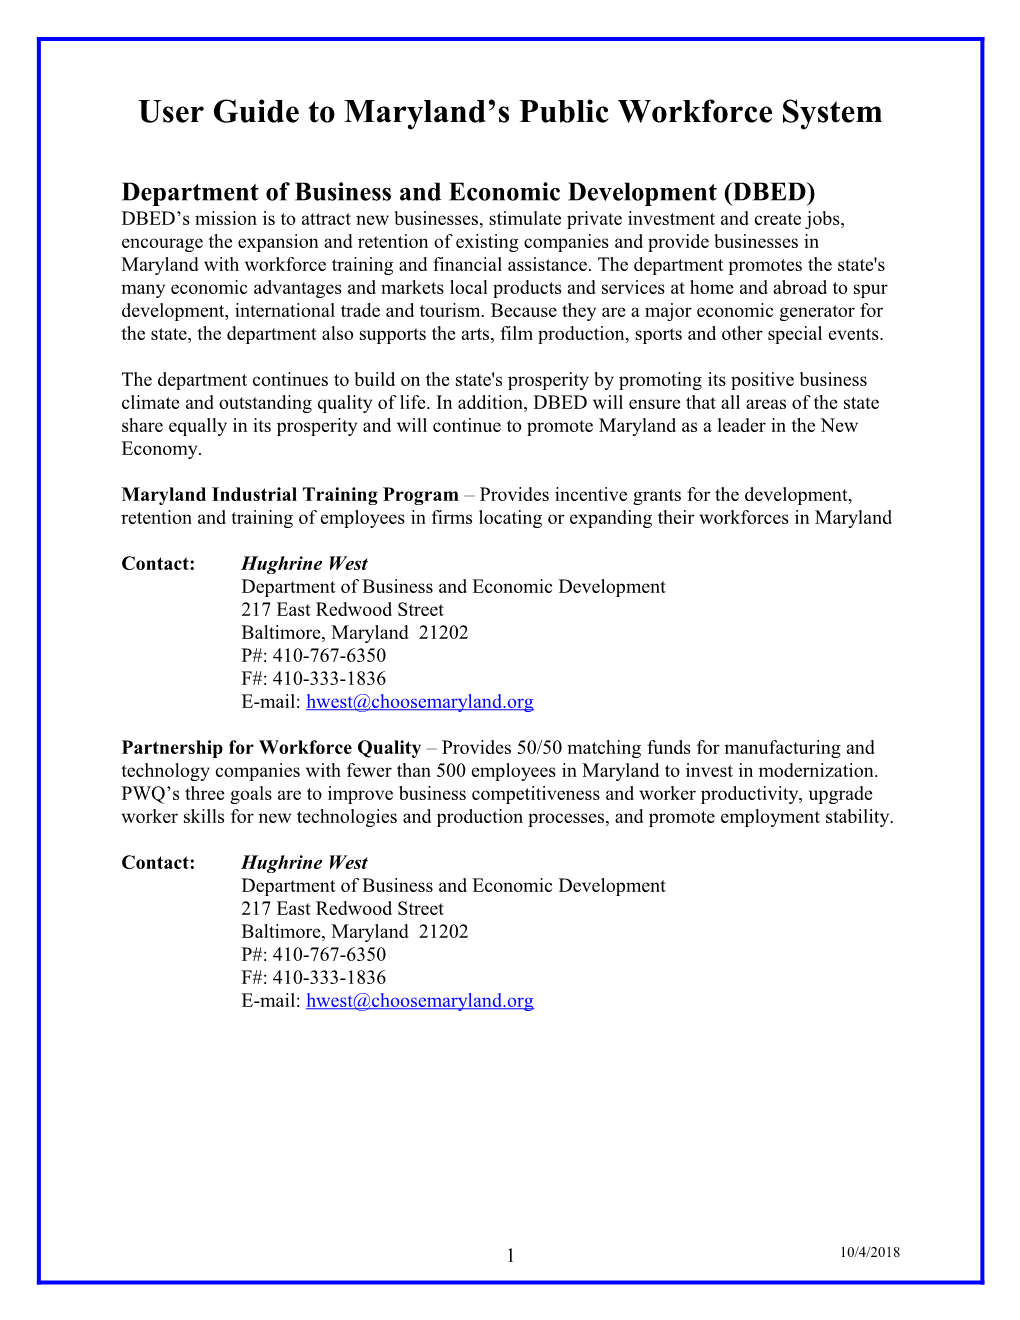 Program Contact Information for Maryland Public Workforce Programs